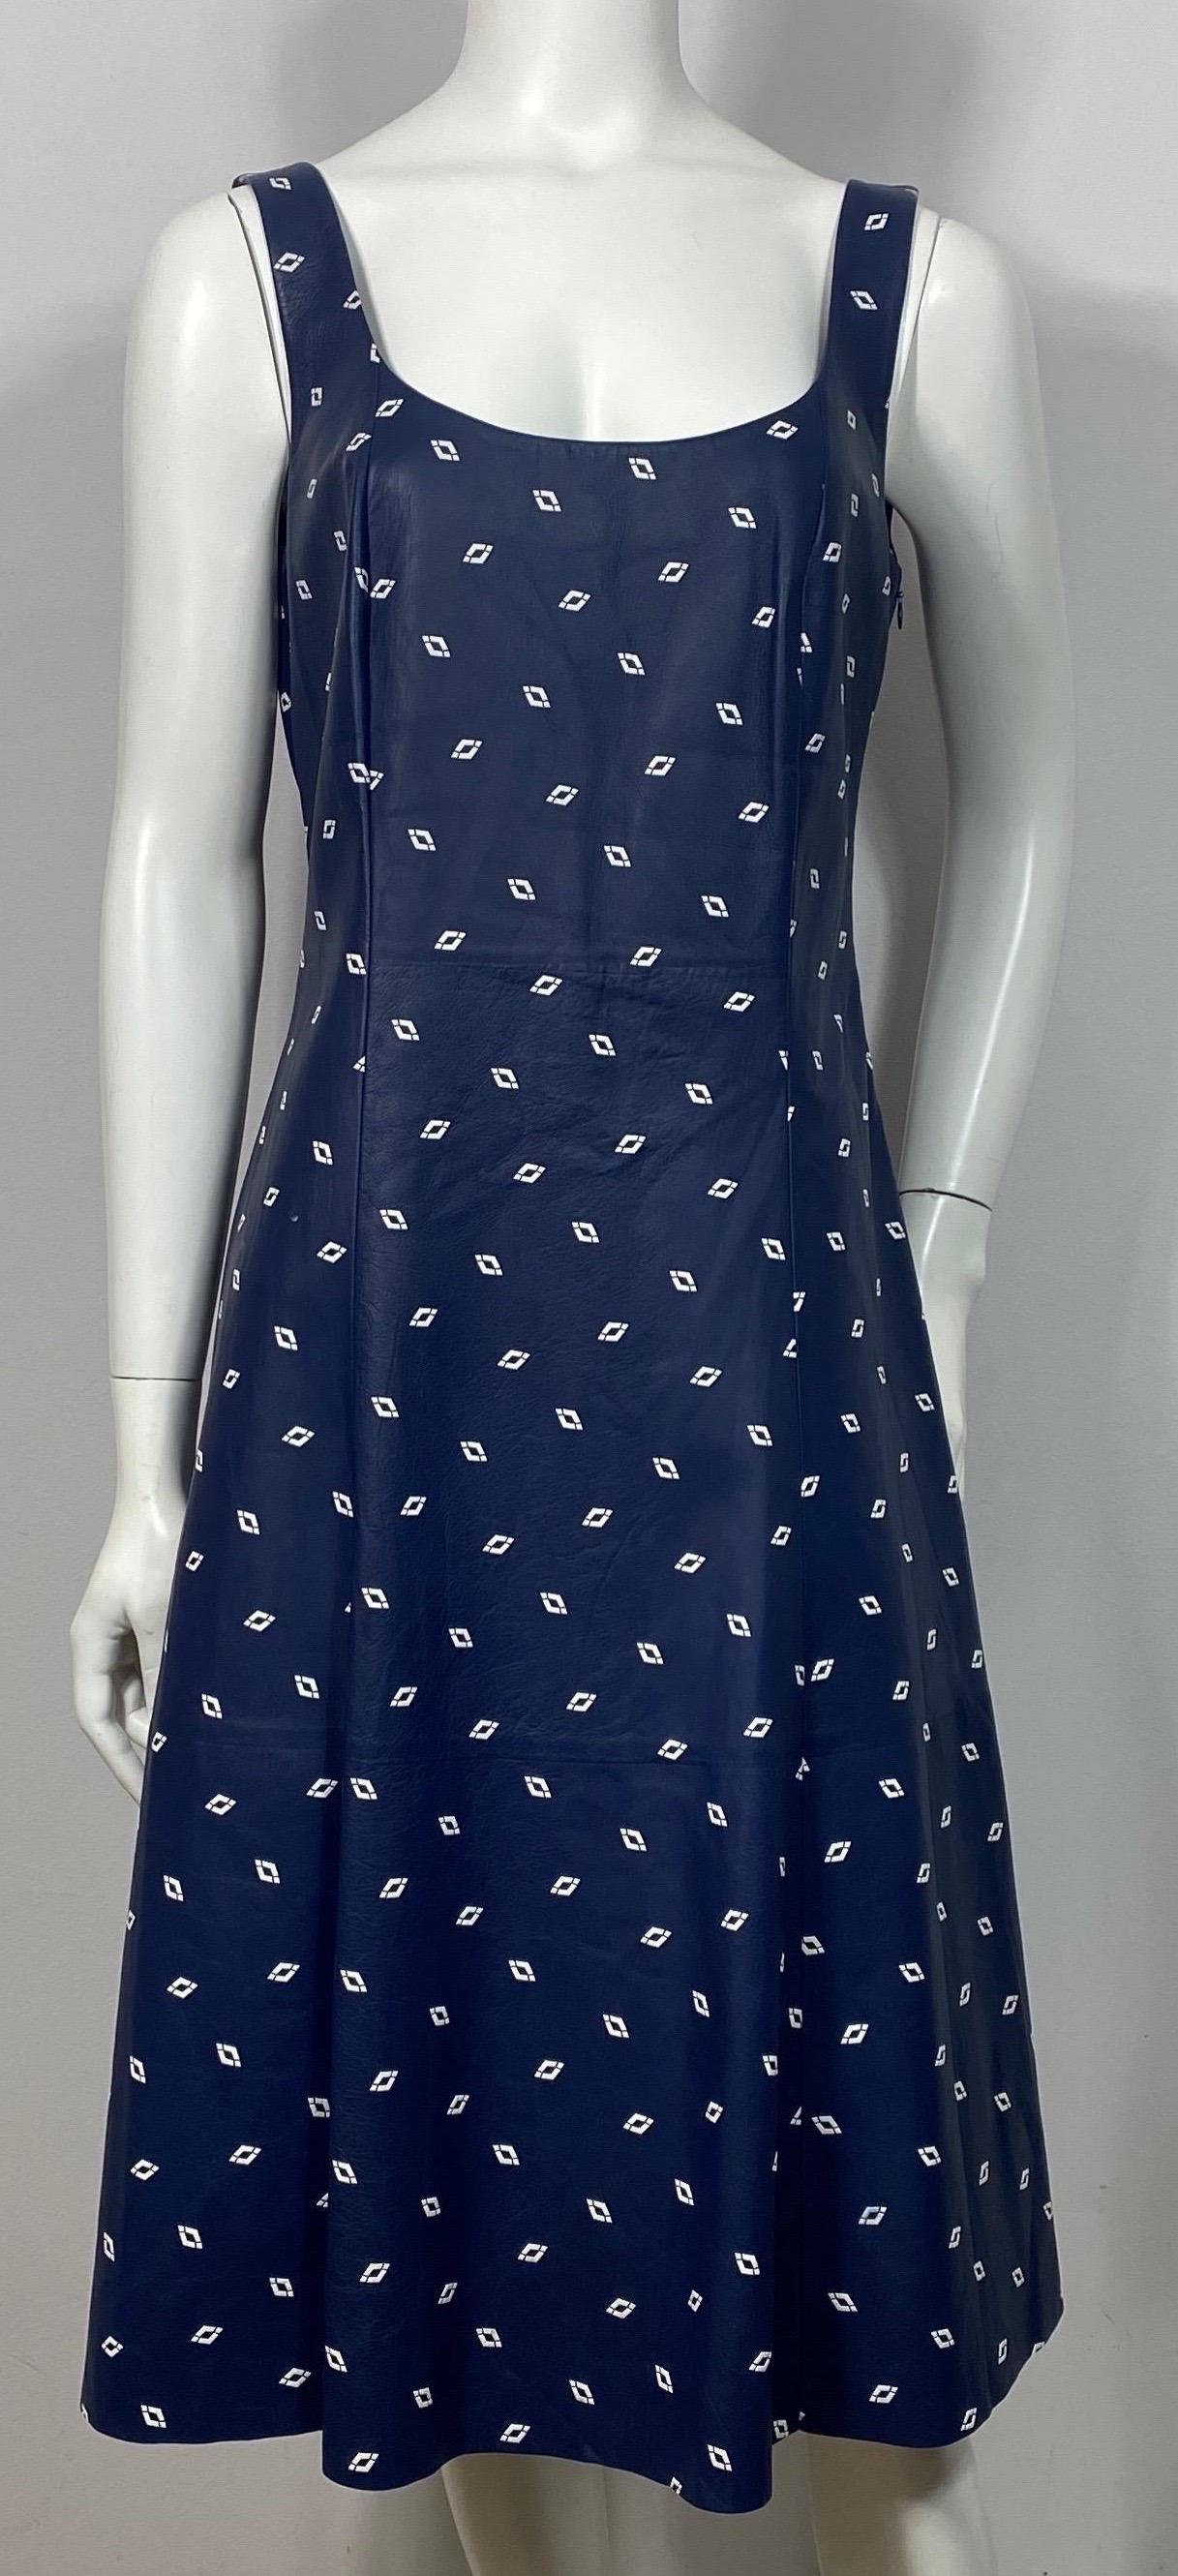 Ralph Lauren Purple Label Navy and White Leather Dress - Size 10  This sleeveless leather dress has an A line cut to it, a low scoop almost square neckline, lined in a navy monogrammed silk, 14” side zipper under the left arm with a top hook and eye